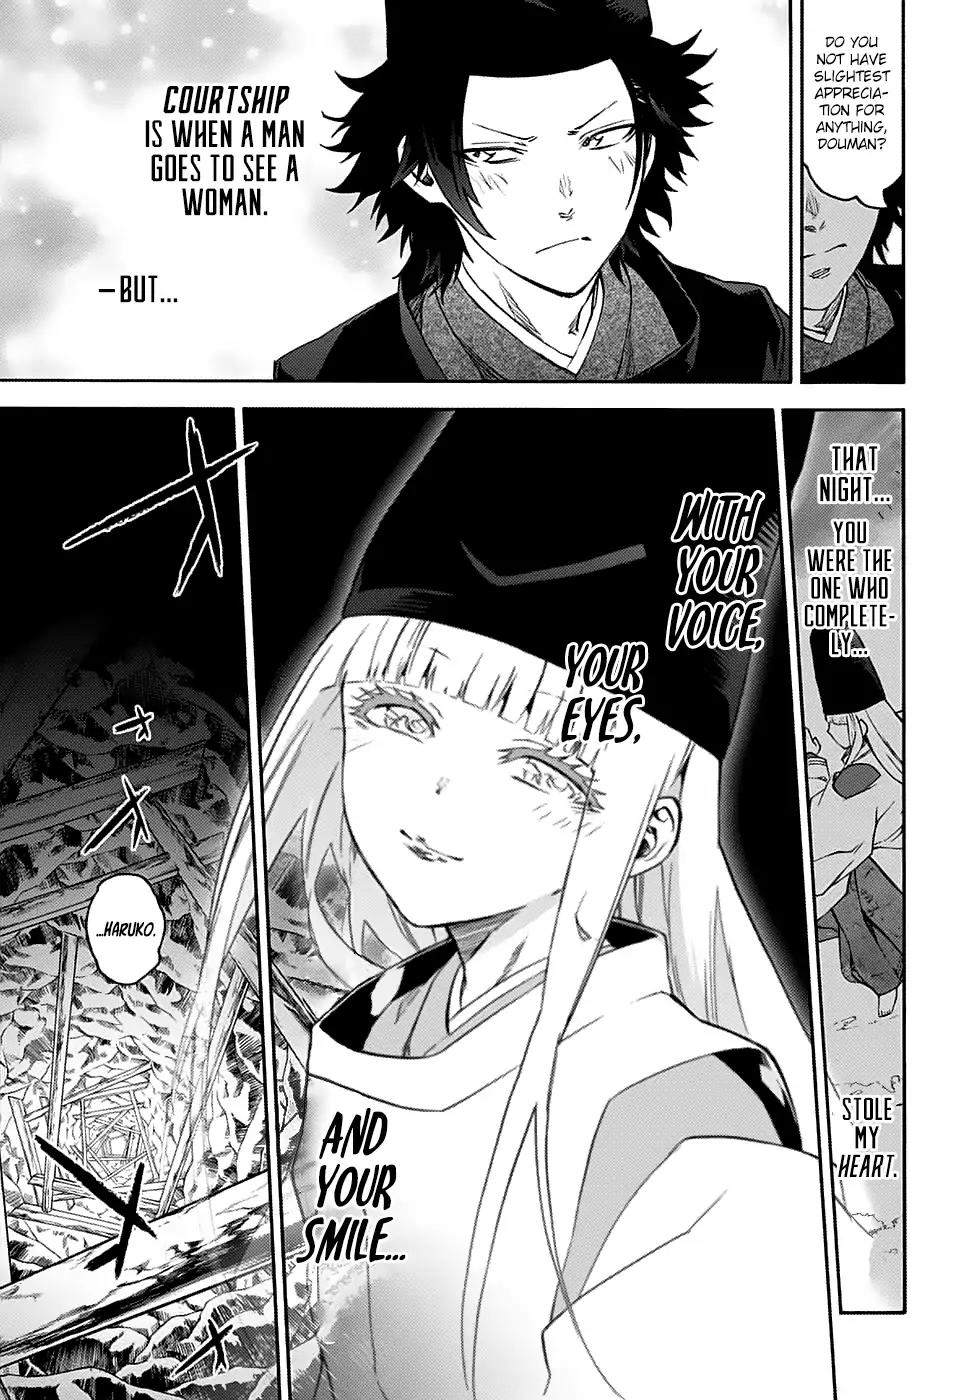 Sousei no Onmyouji Vol.TBD Chapter 76.5: Special Story: